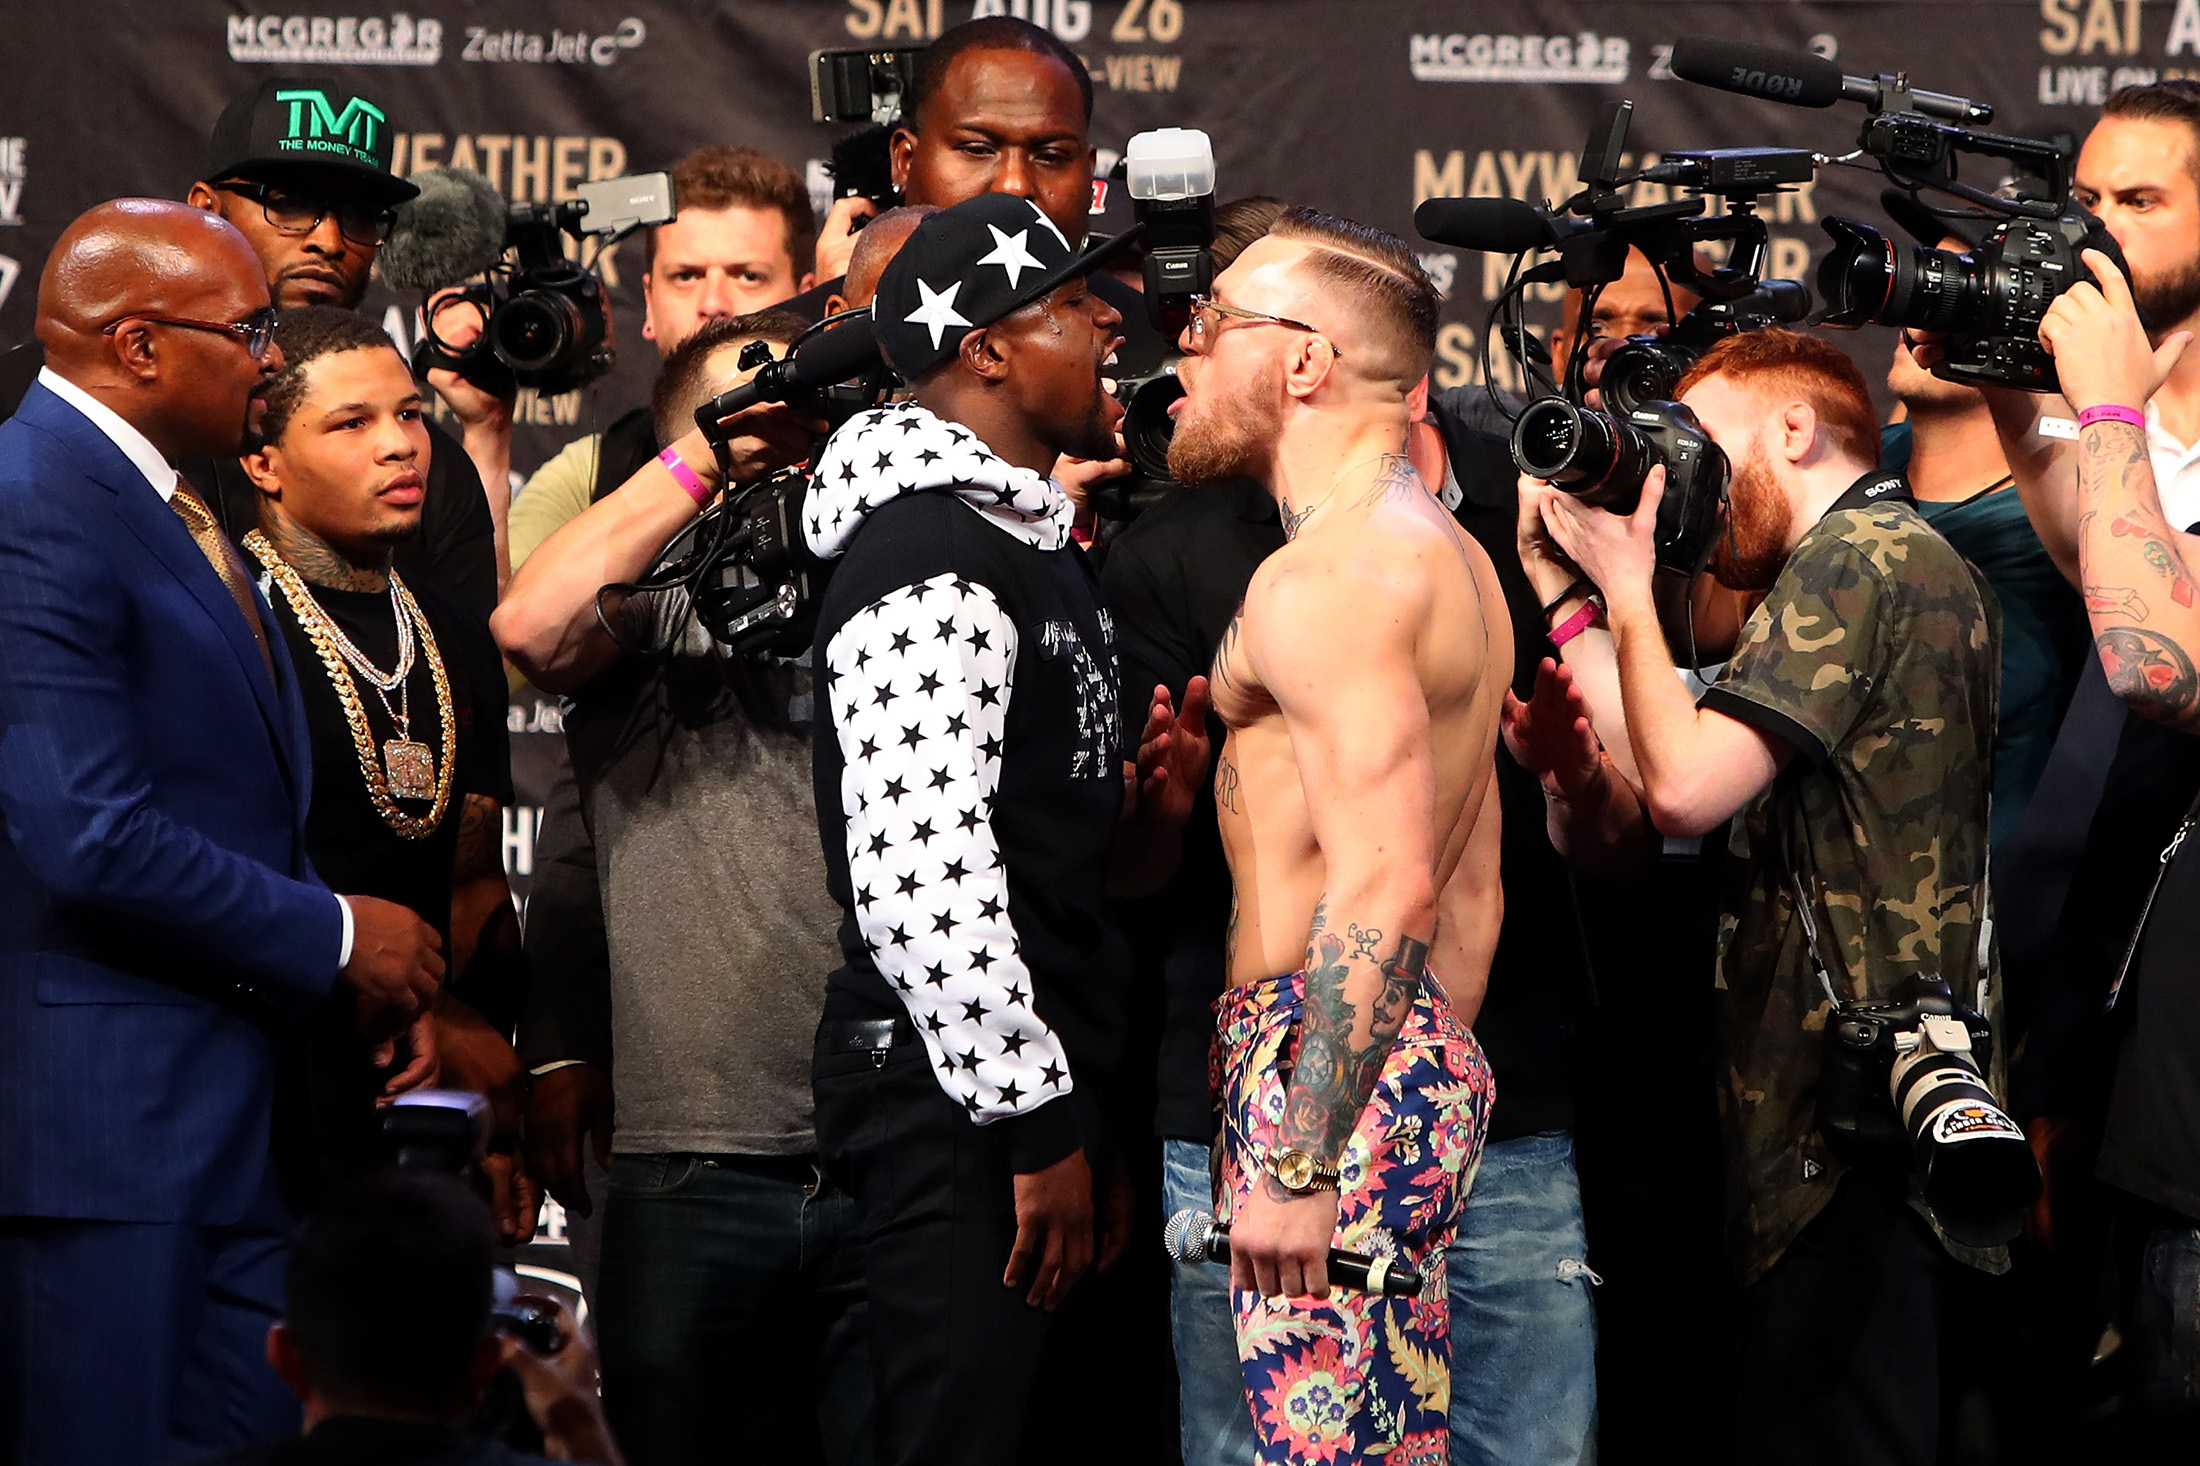 Gamblers Apparently Think McGregor Could Really Beat Mayweather